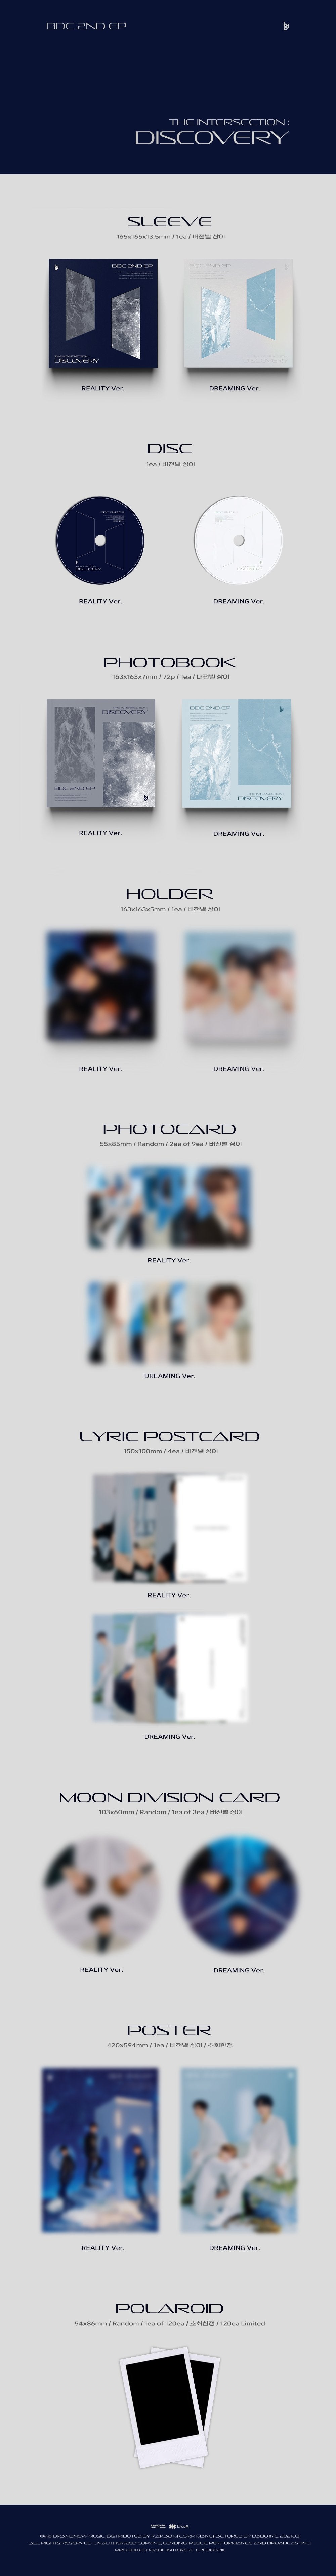 1 CD
1 Photo Book (72 pages)
1 Holder
2 Photo Cards
4 Lyric Posts
1 Moon Division Card